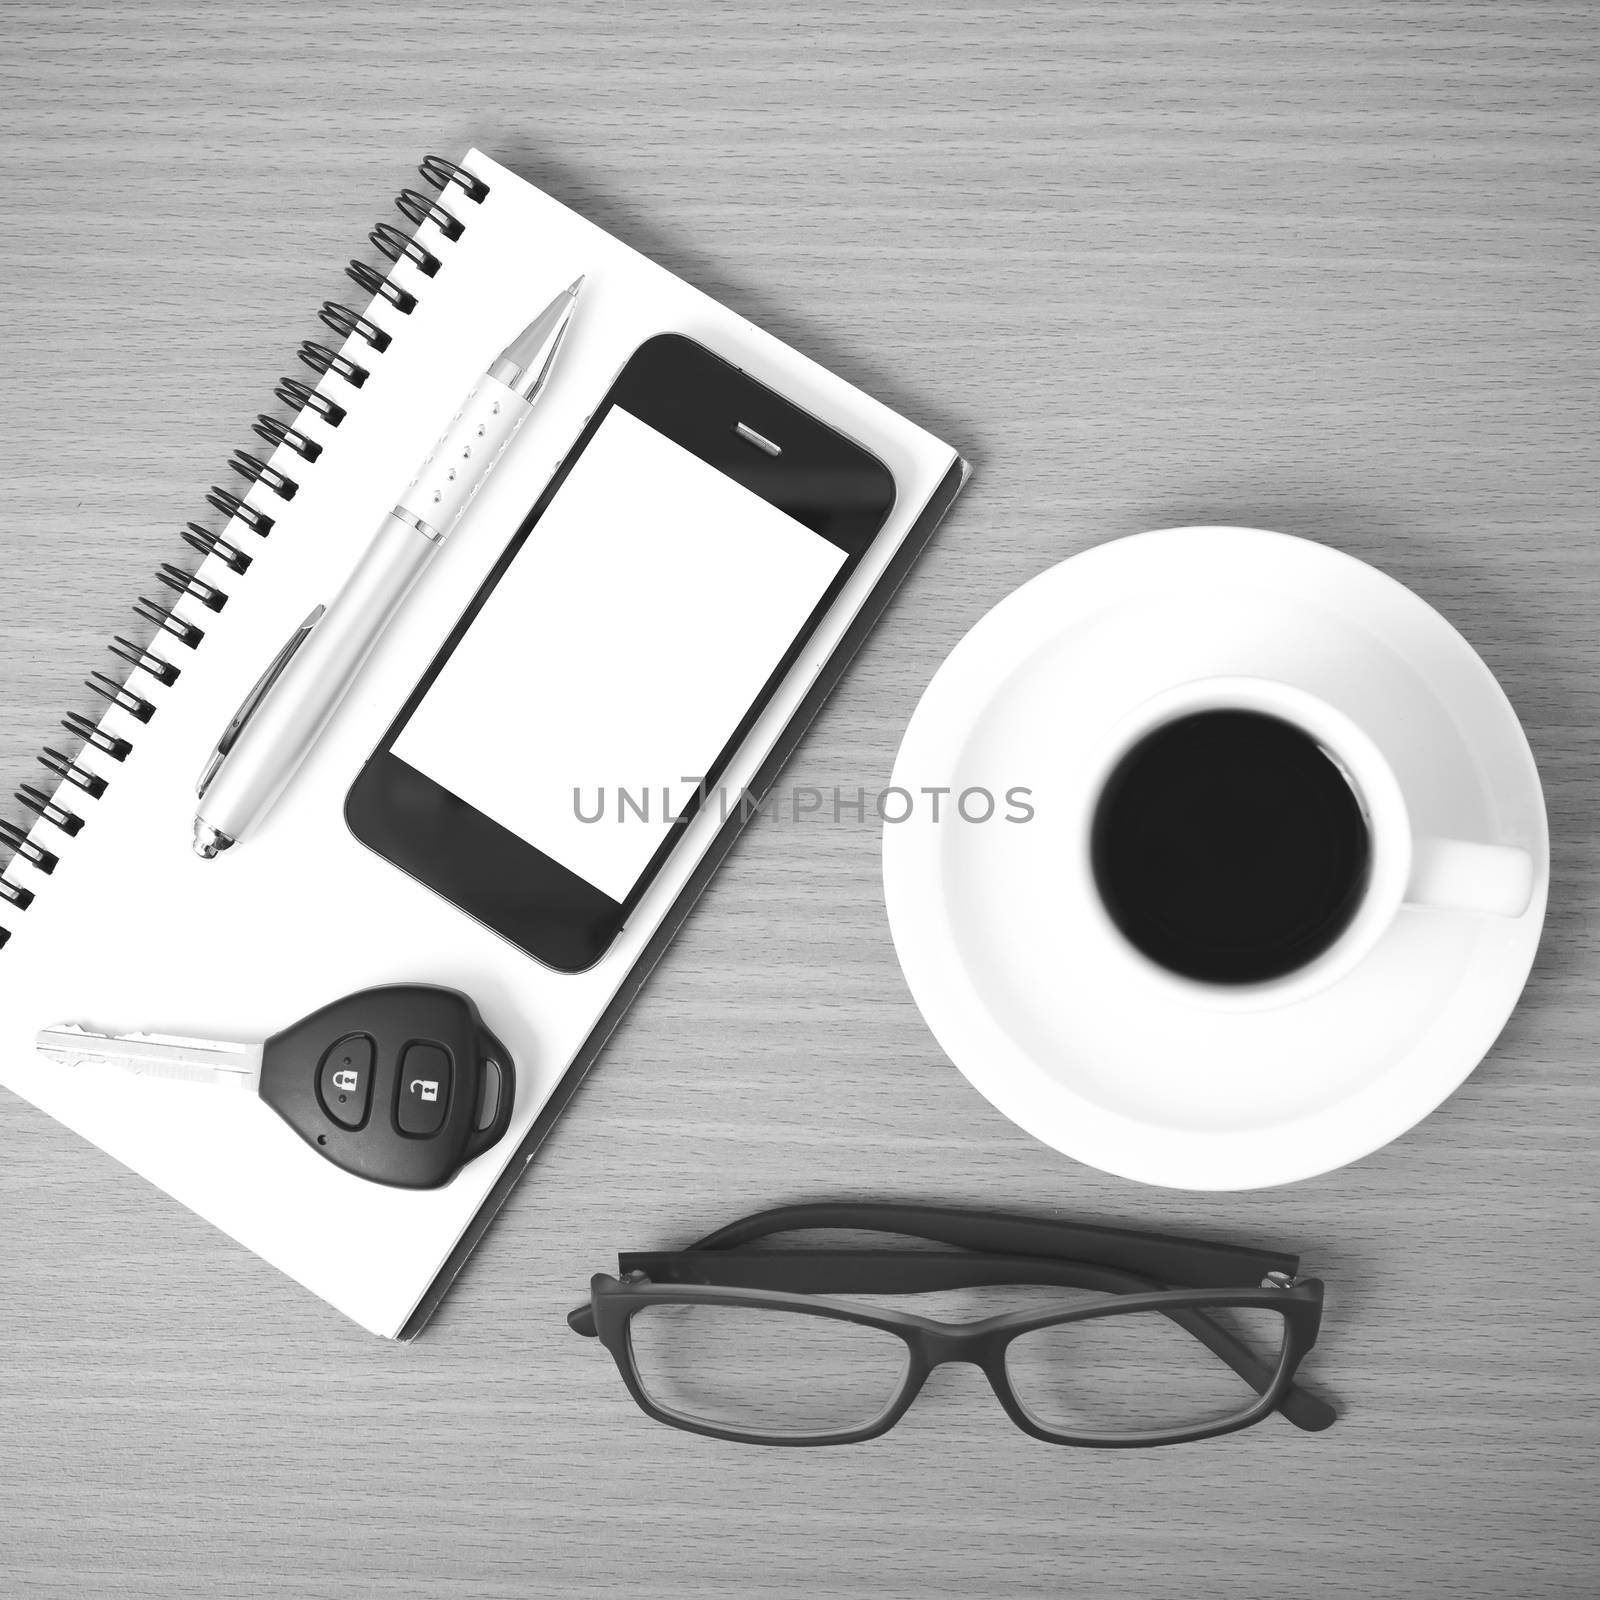 coffee,phone,notepad,eyeglasses and car key on wood table background black and white color